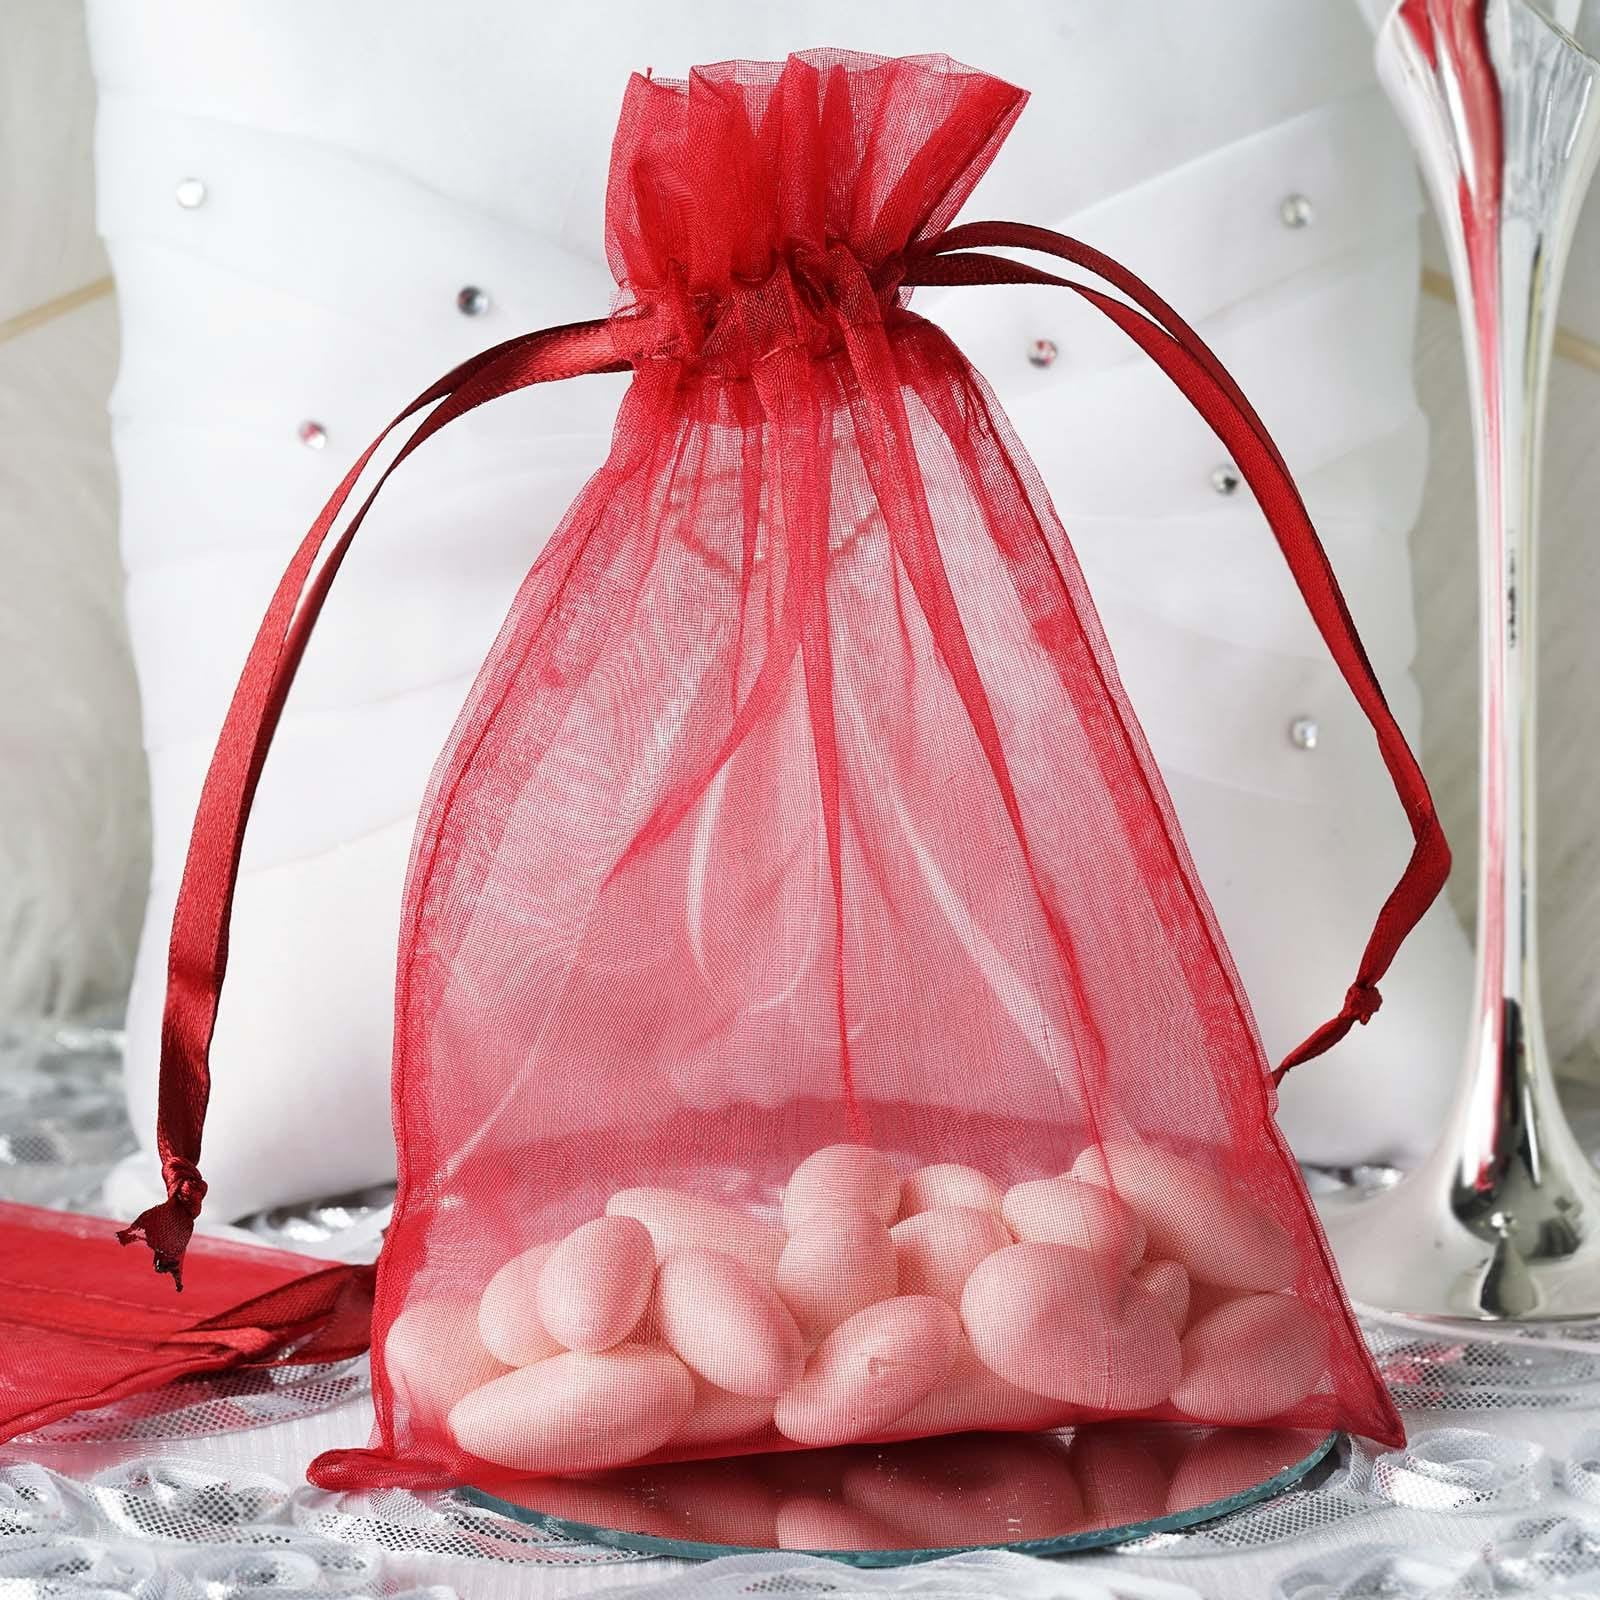 50Pcs/Set Organza Bags Wedding Party Favor Decoration Gift Candy Sheer Pouches 